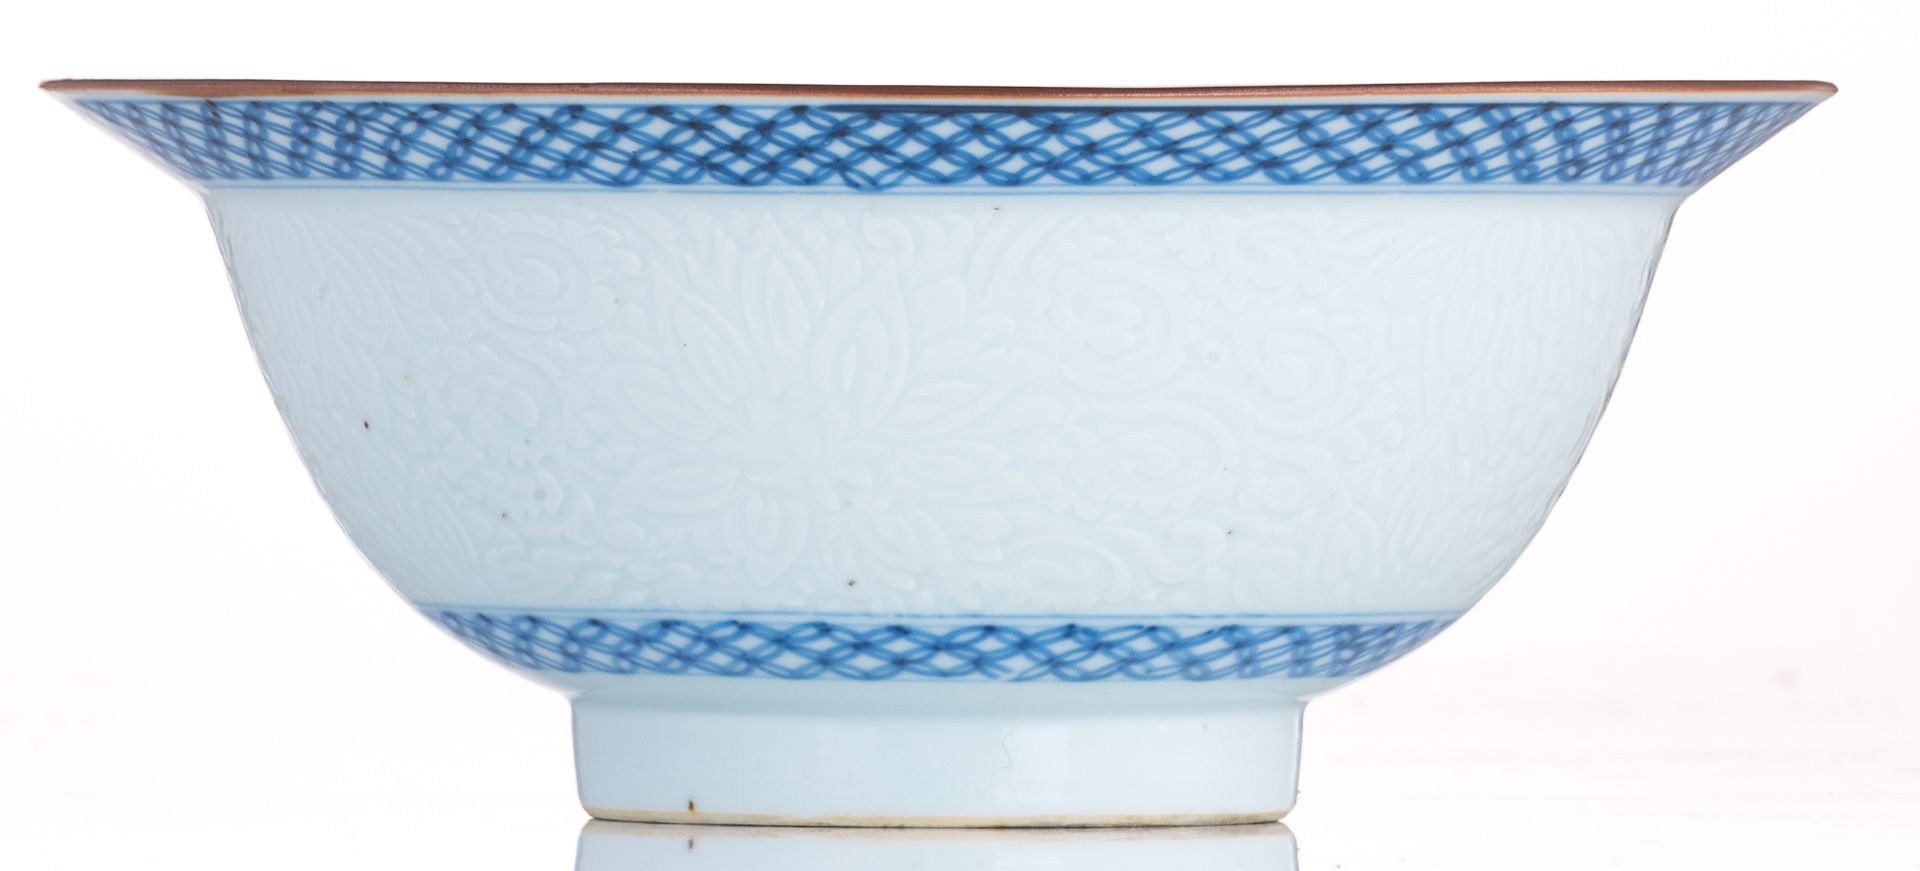 A Chinese porcelain blue and white bowl with a small flat rim, Kangxi (ca 1690-1722), H 8 - ø 20 cm - Image 3 of 7